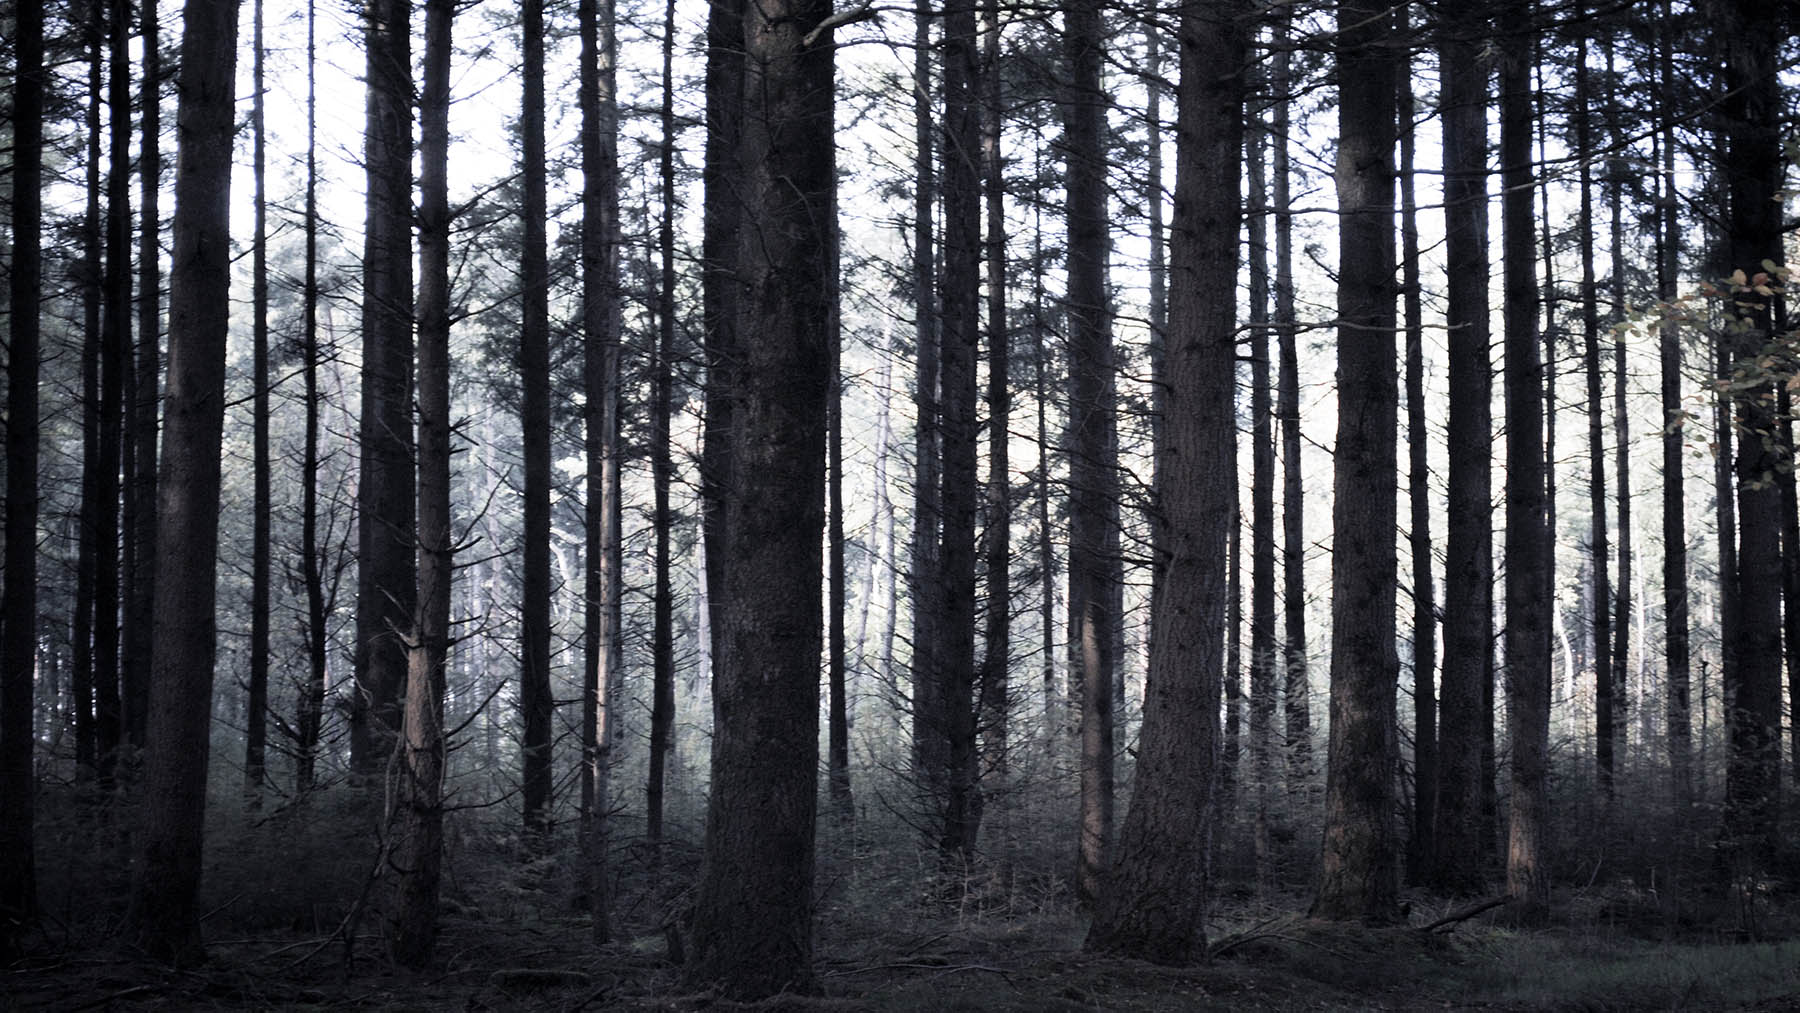 Stock photo of spooky, and somewhat barren, woods of evergreen trees